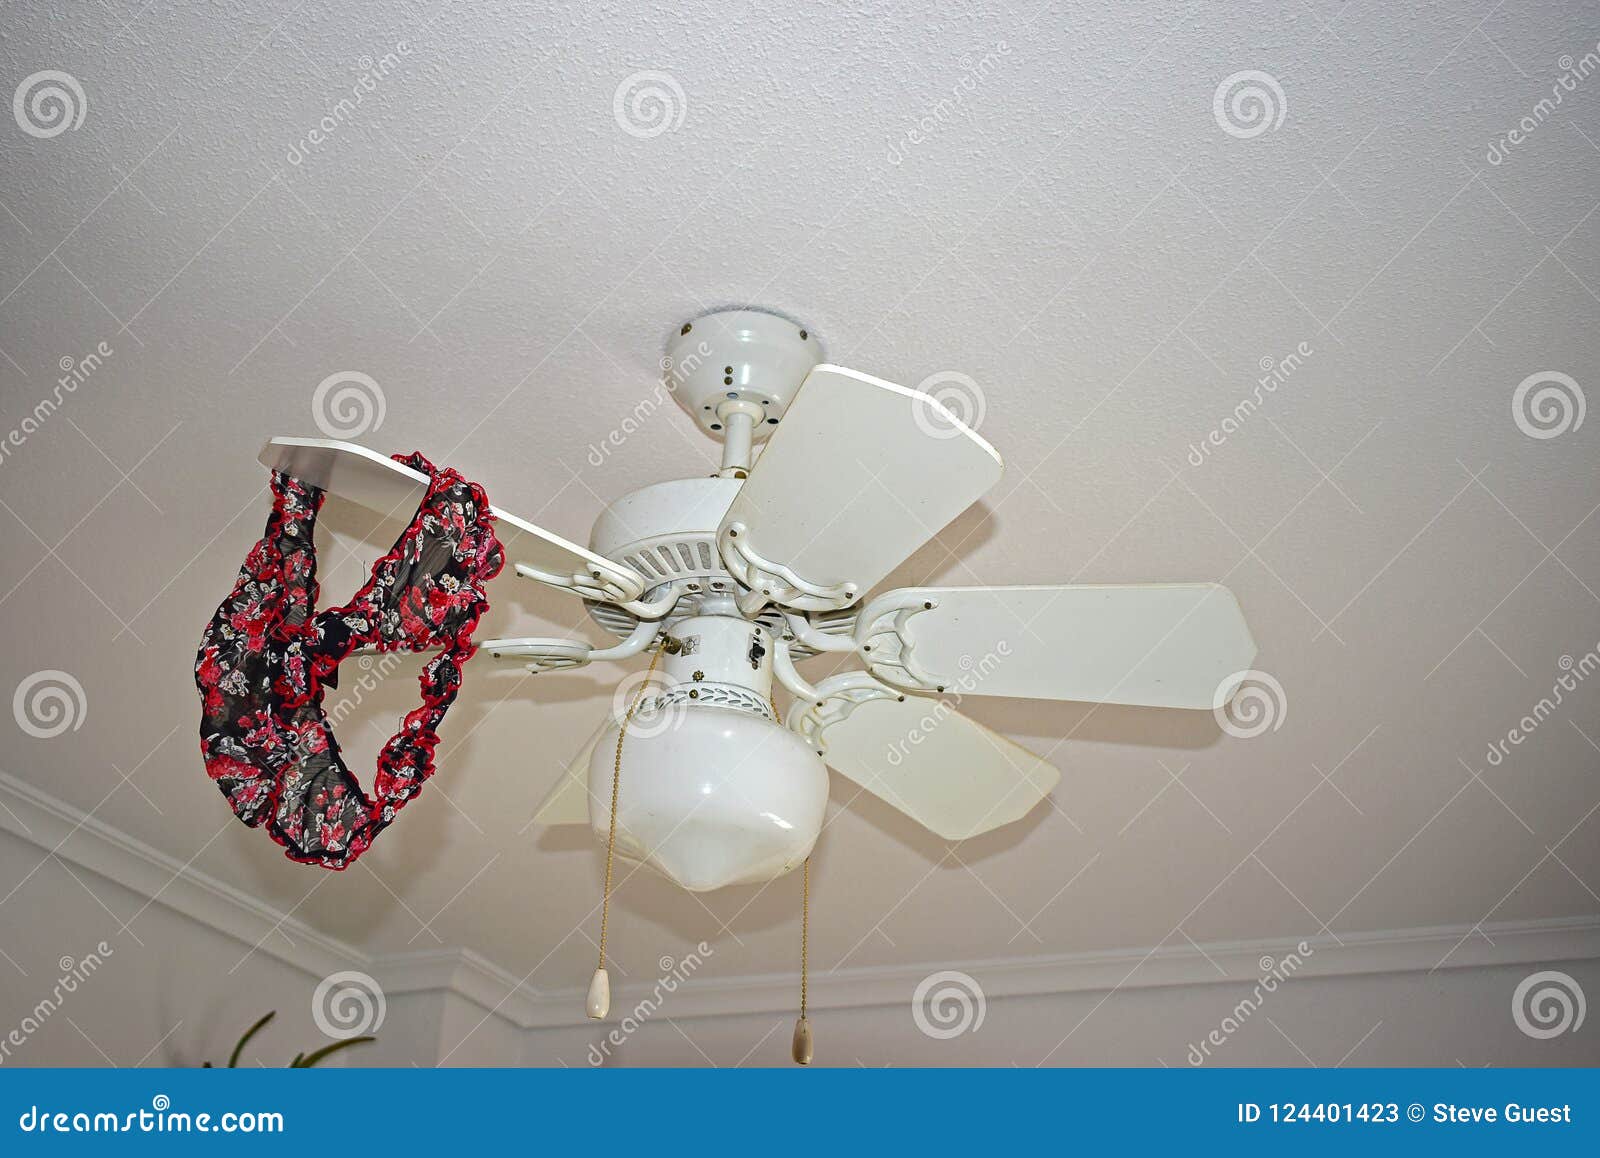 Ladies Knickers On The Ceiling Fan Stock Image Image Of